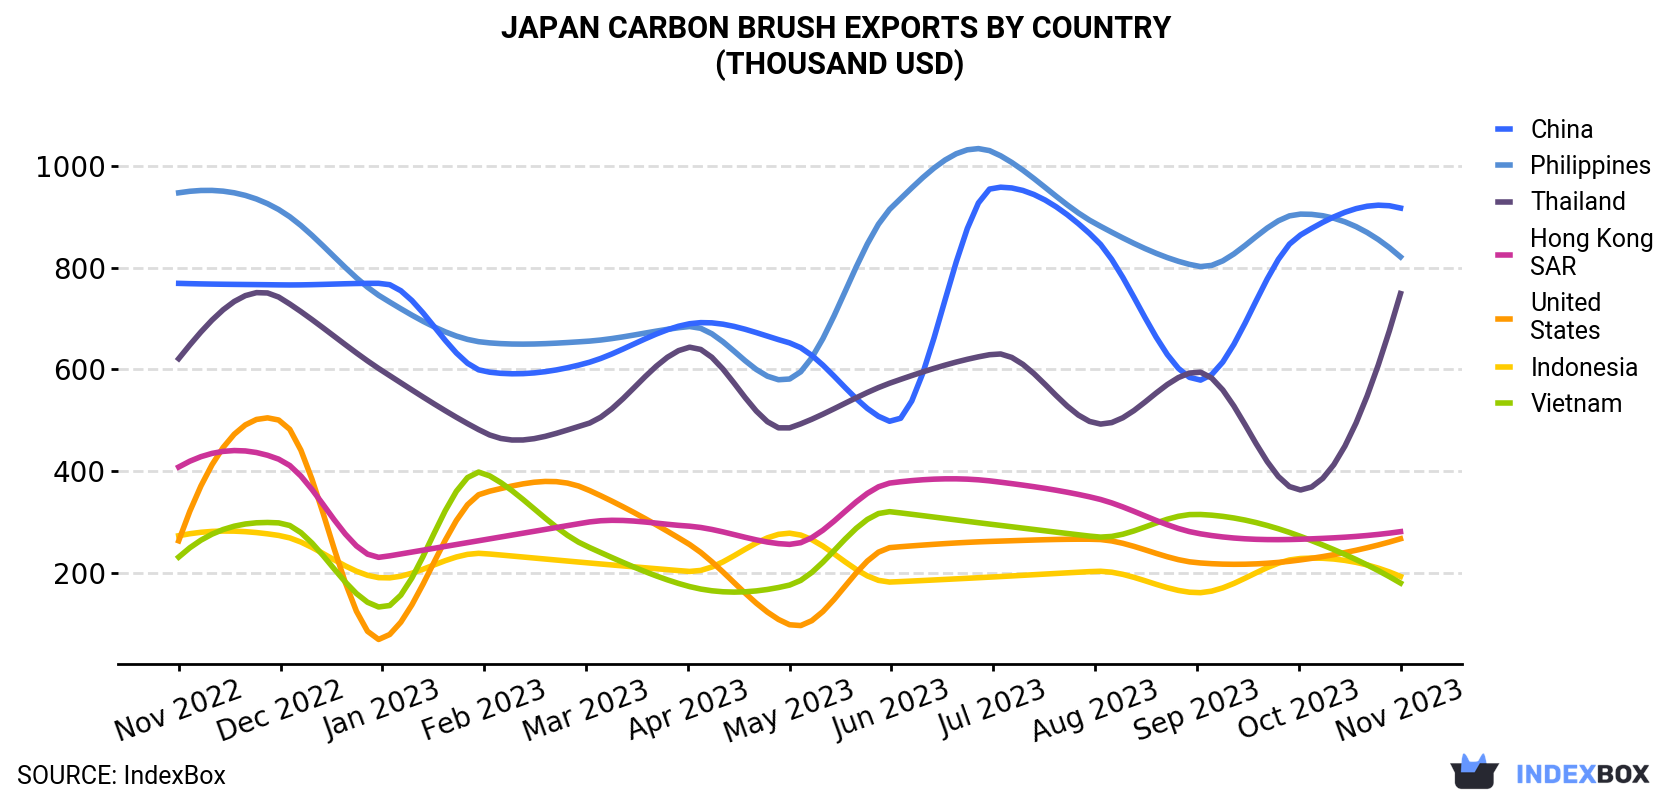 Japan Carbon Brush Exports By Country (Thousand USD)